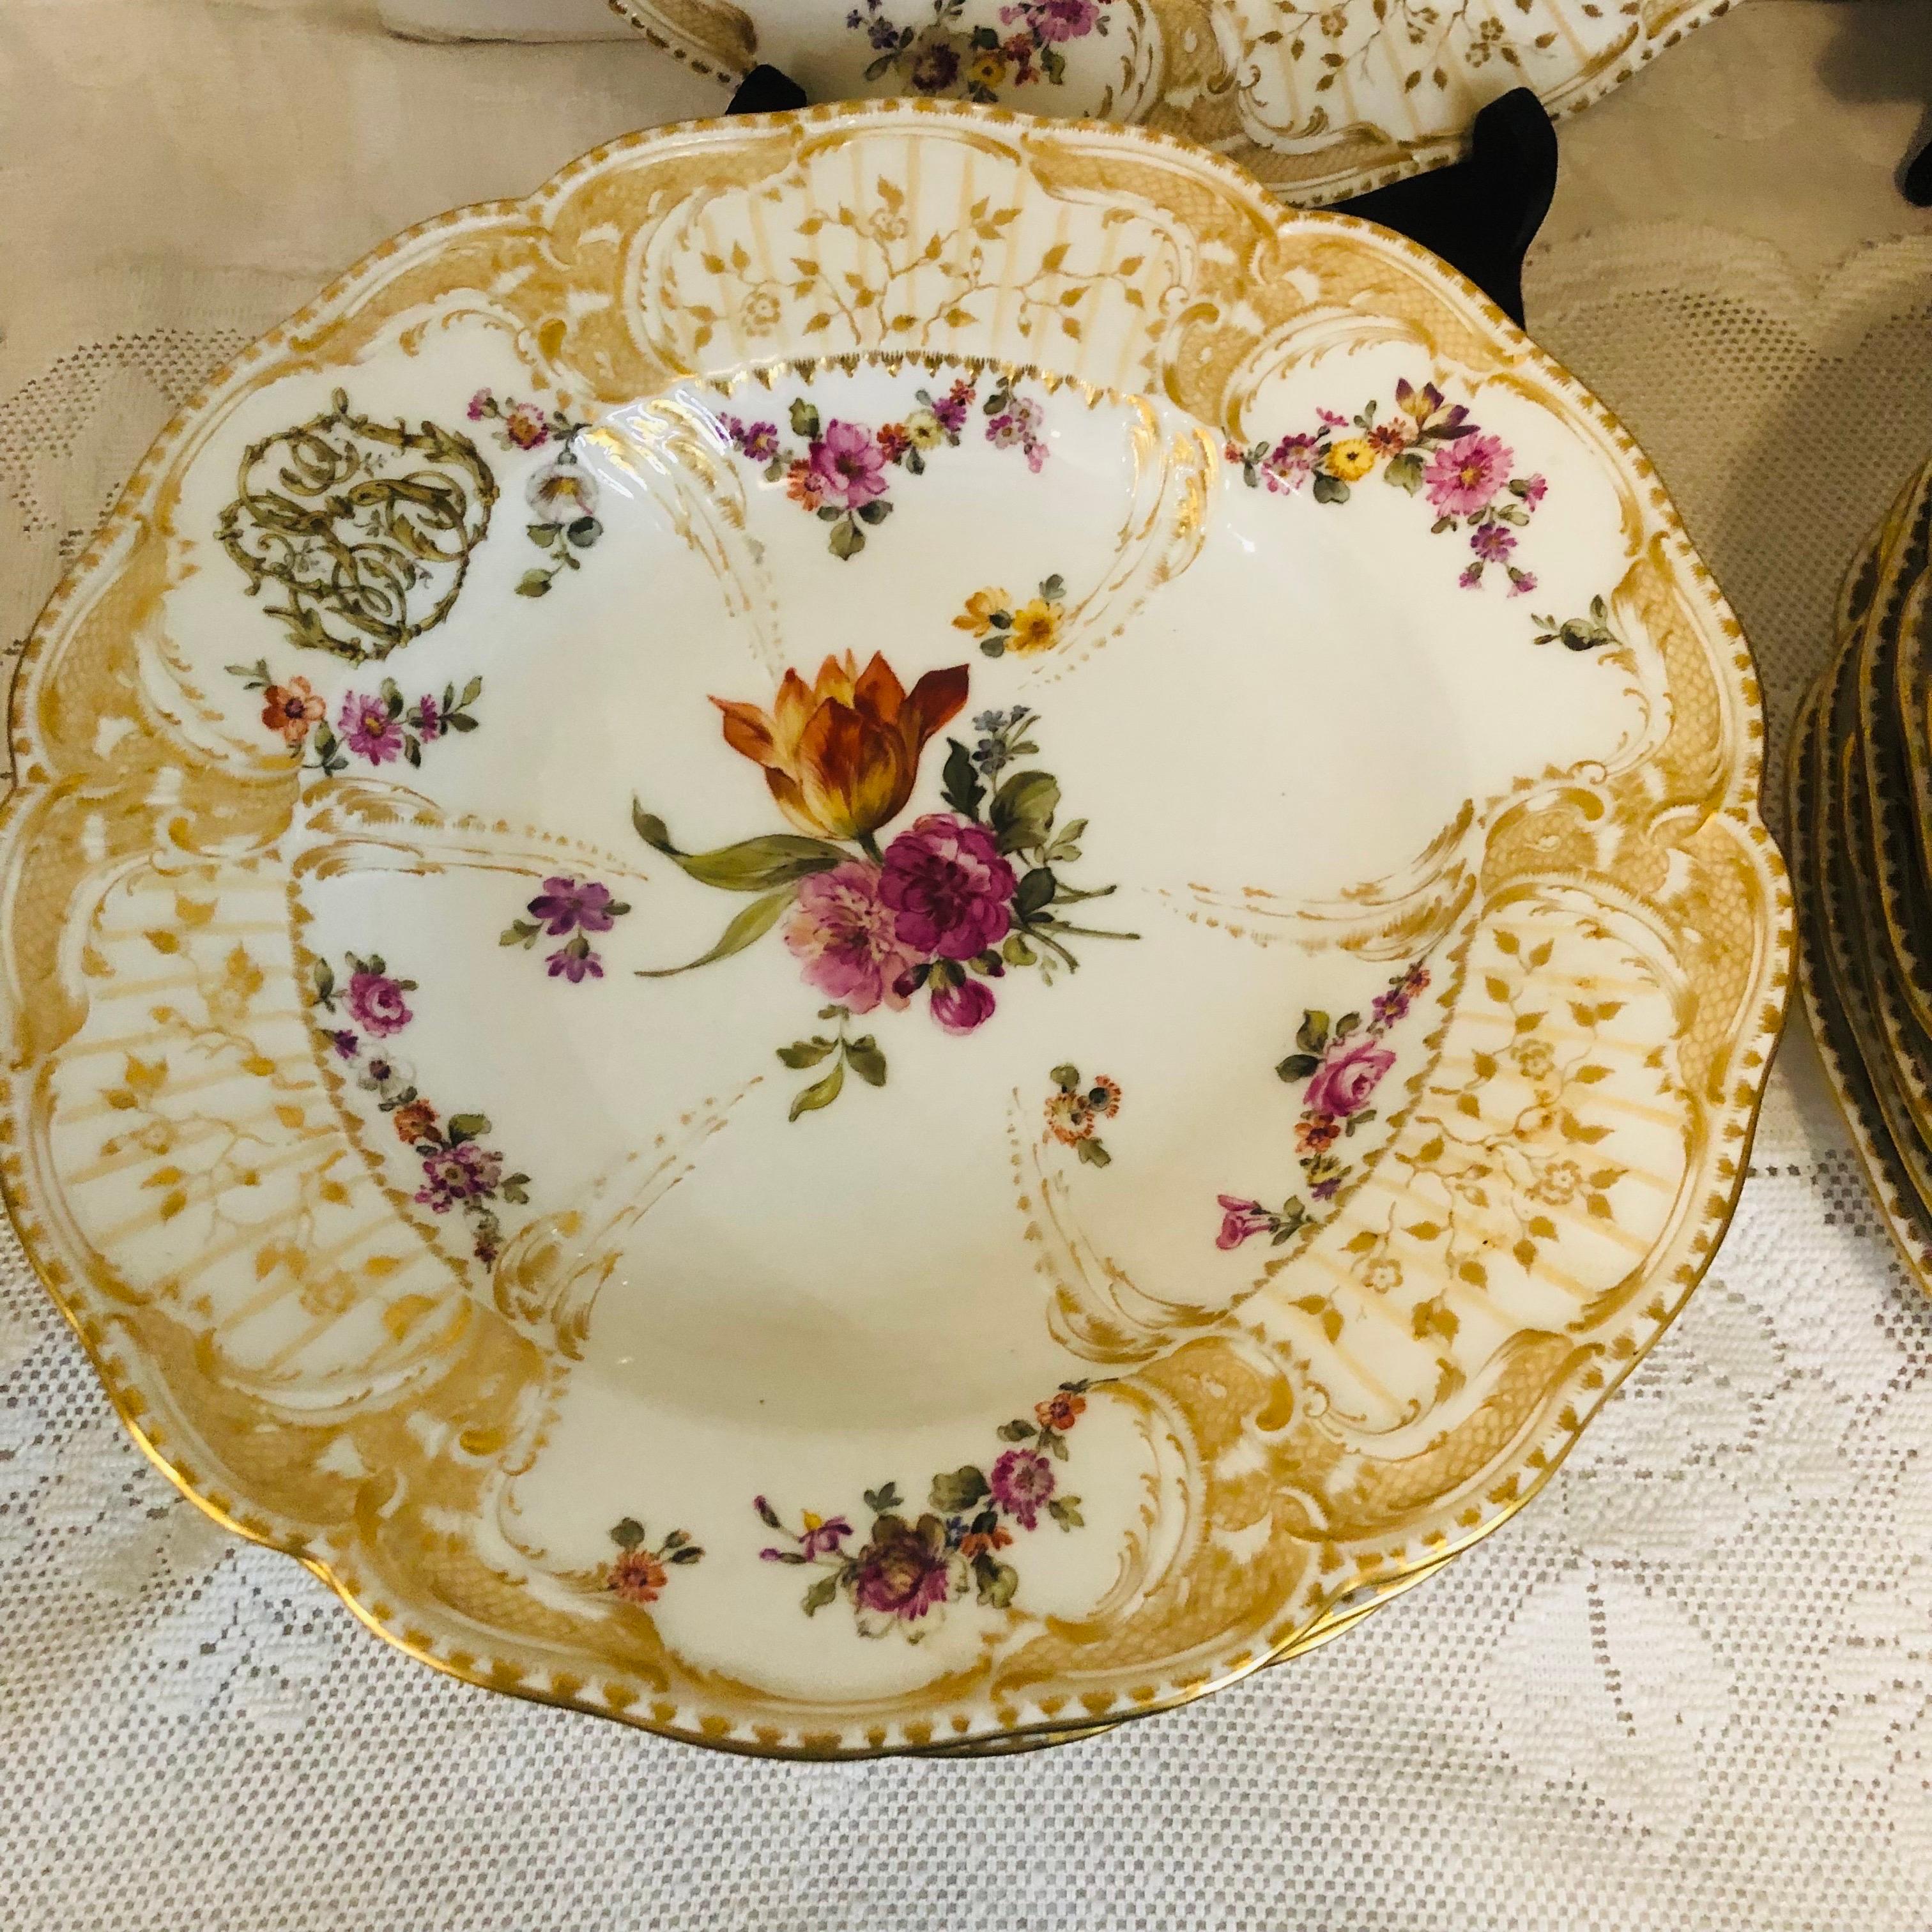 German 8 KPM Dinner Plates & Rim Soups in the Manner of the Potsdam Service